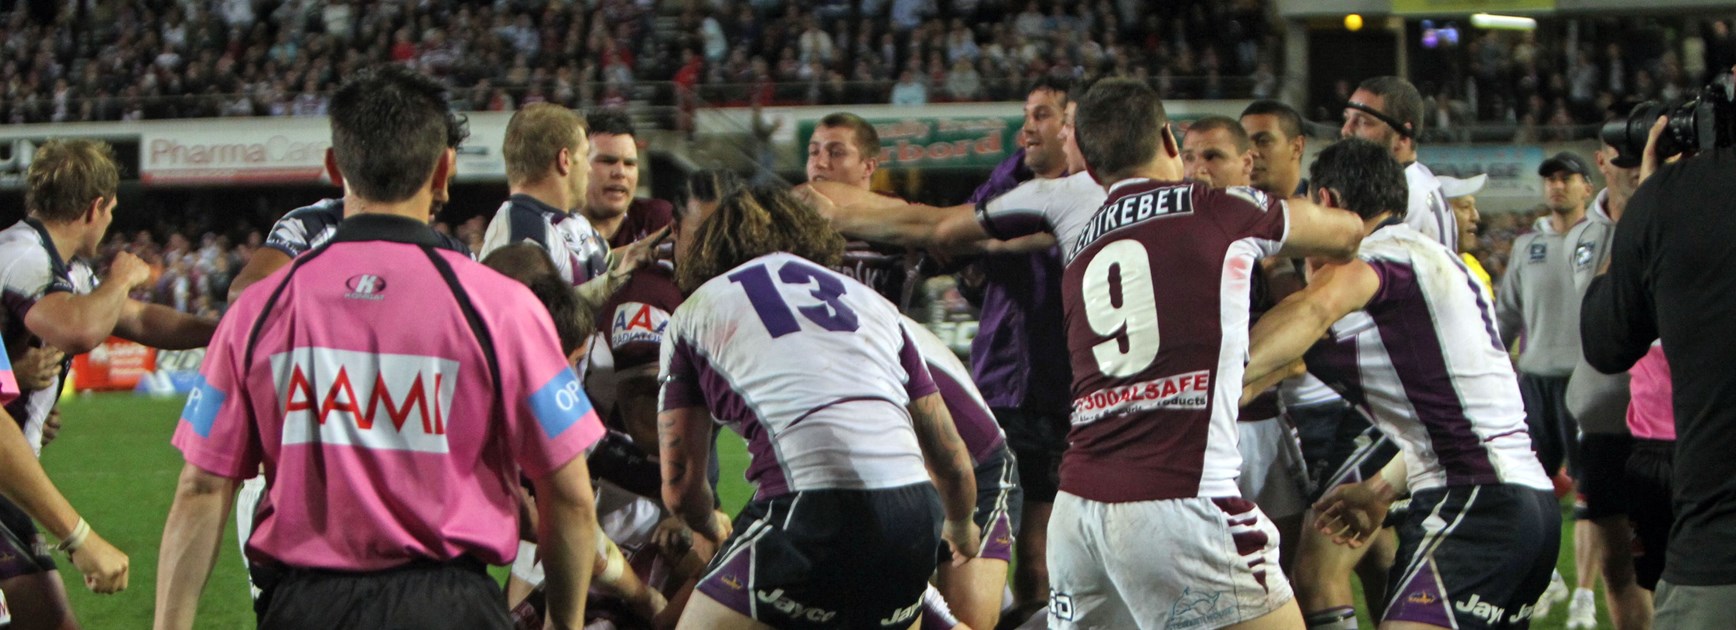 The Sea Eagles and Storm go toe-to-toe in 2011.